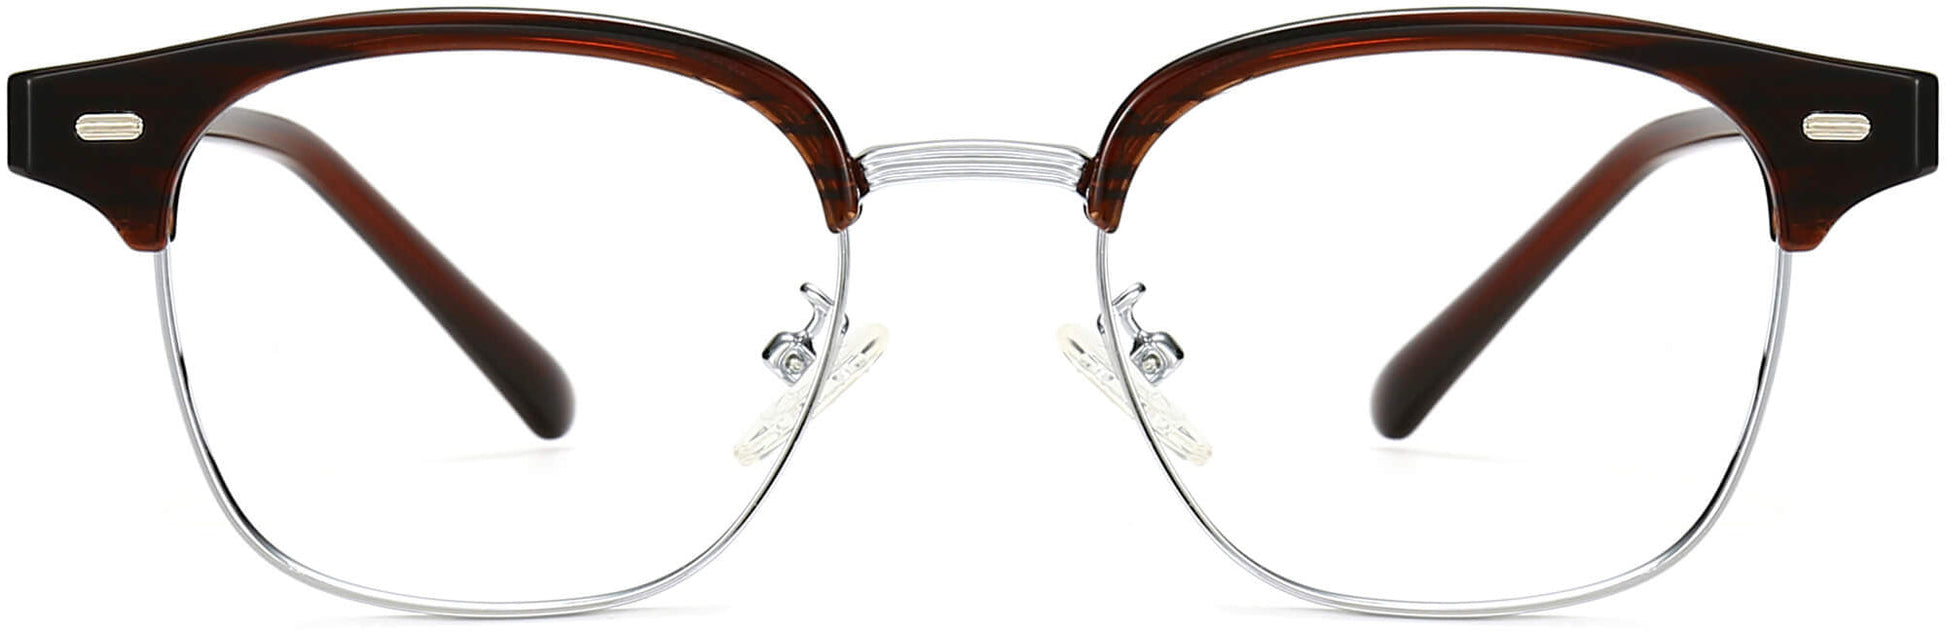 Boston Browline Brown Eyeglasses from ANRRI, front view